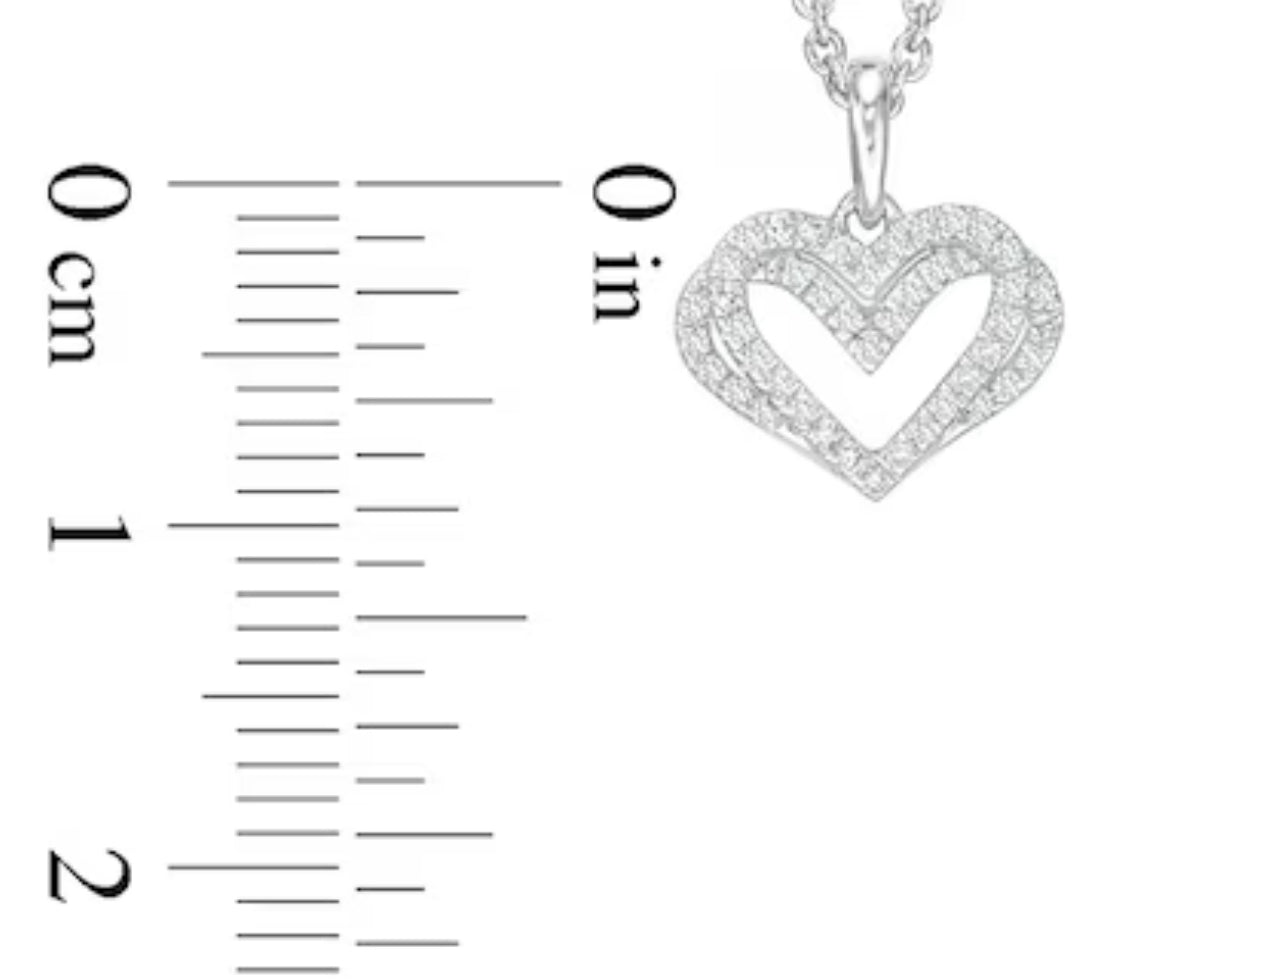 The Kindred Heart from Vera Wang Love Collection 1/10 CT. T.W. Diamond Mini Pendant in Sterling Silver - 19"